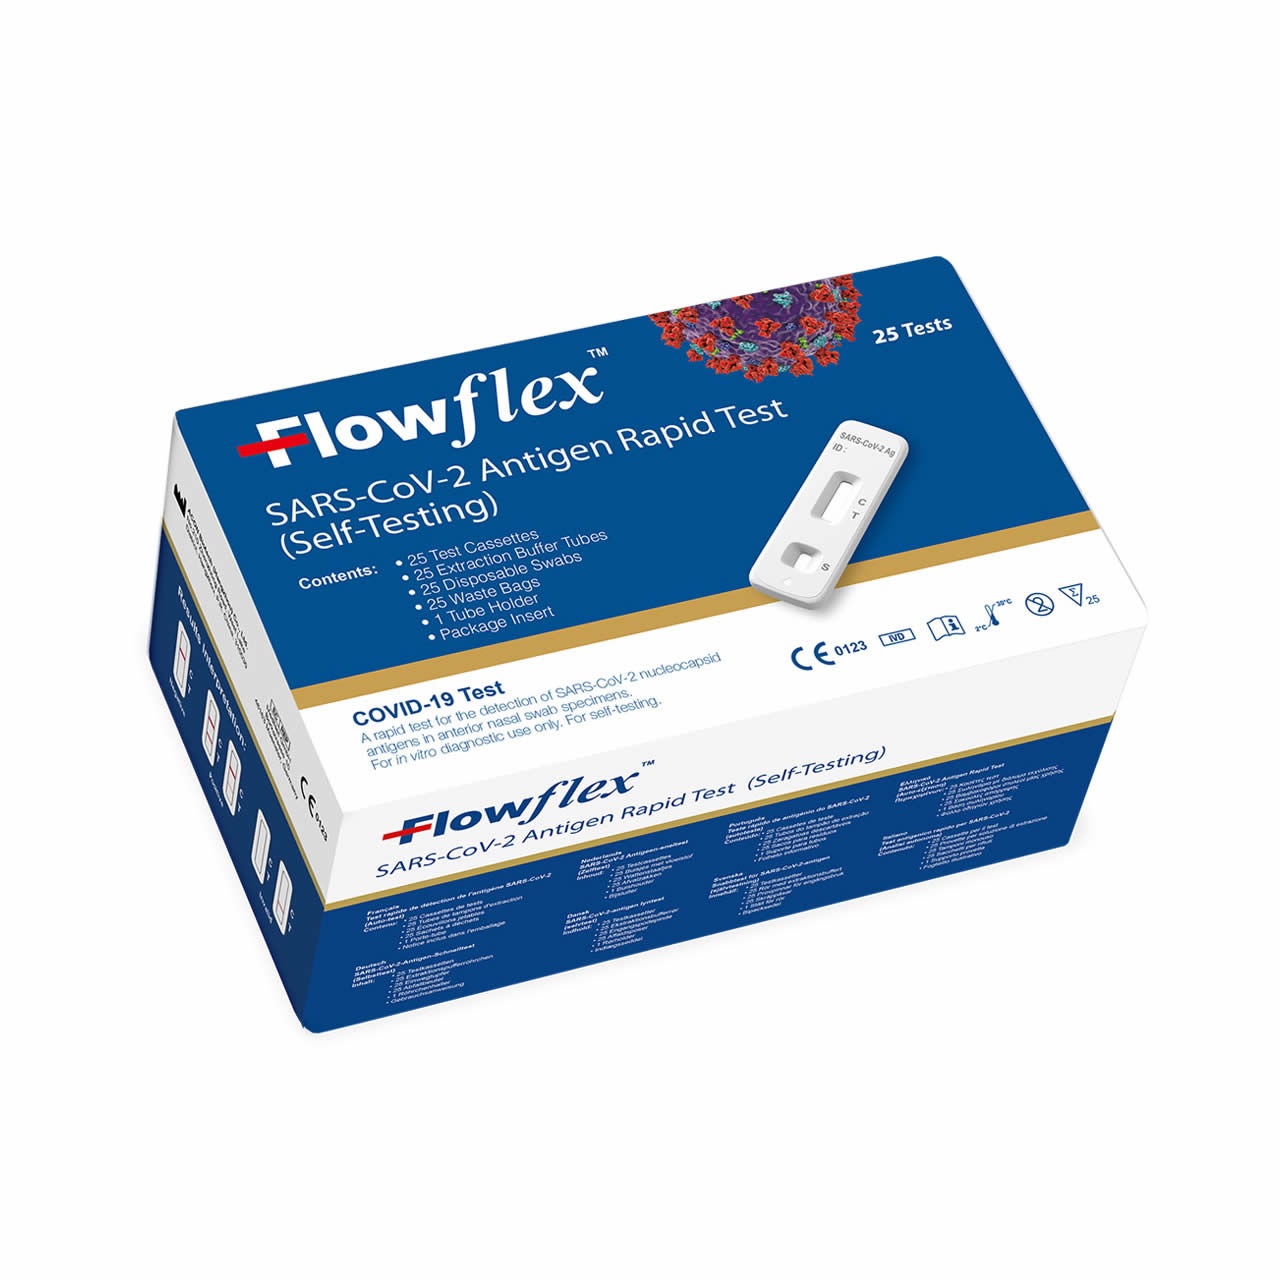 Lateral Flow Test Kits - Box of 25